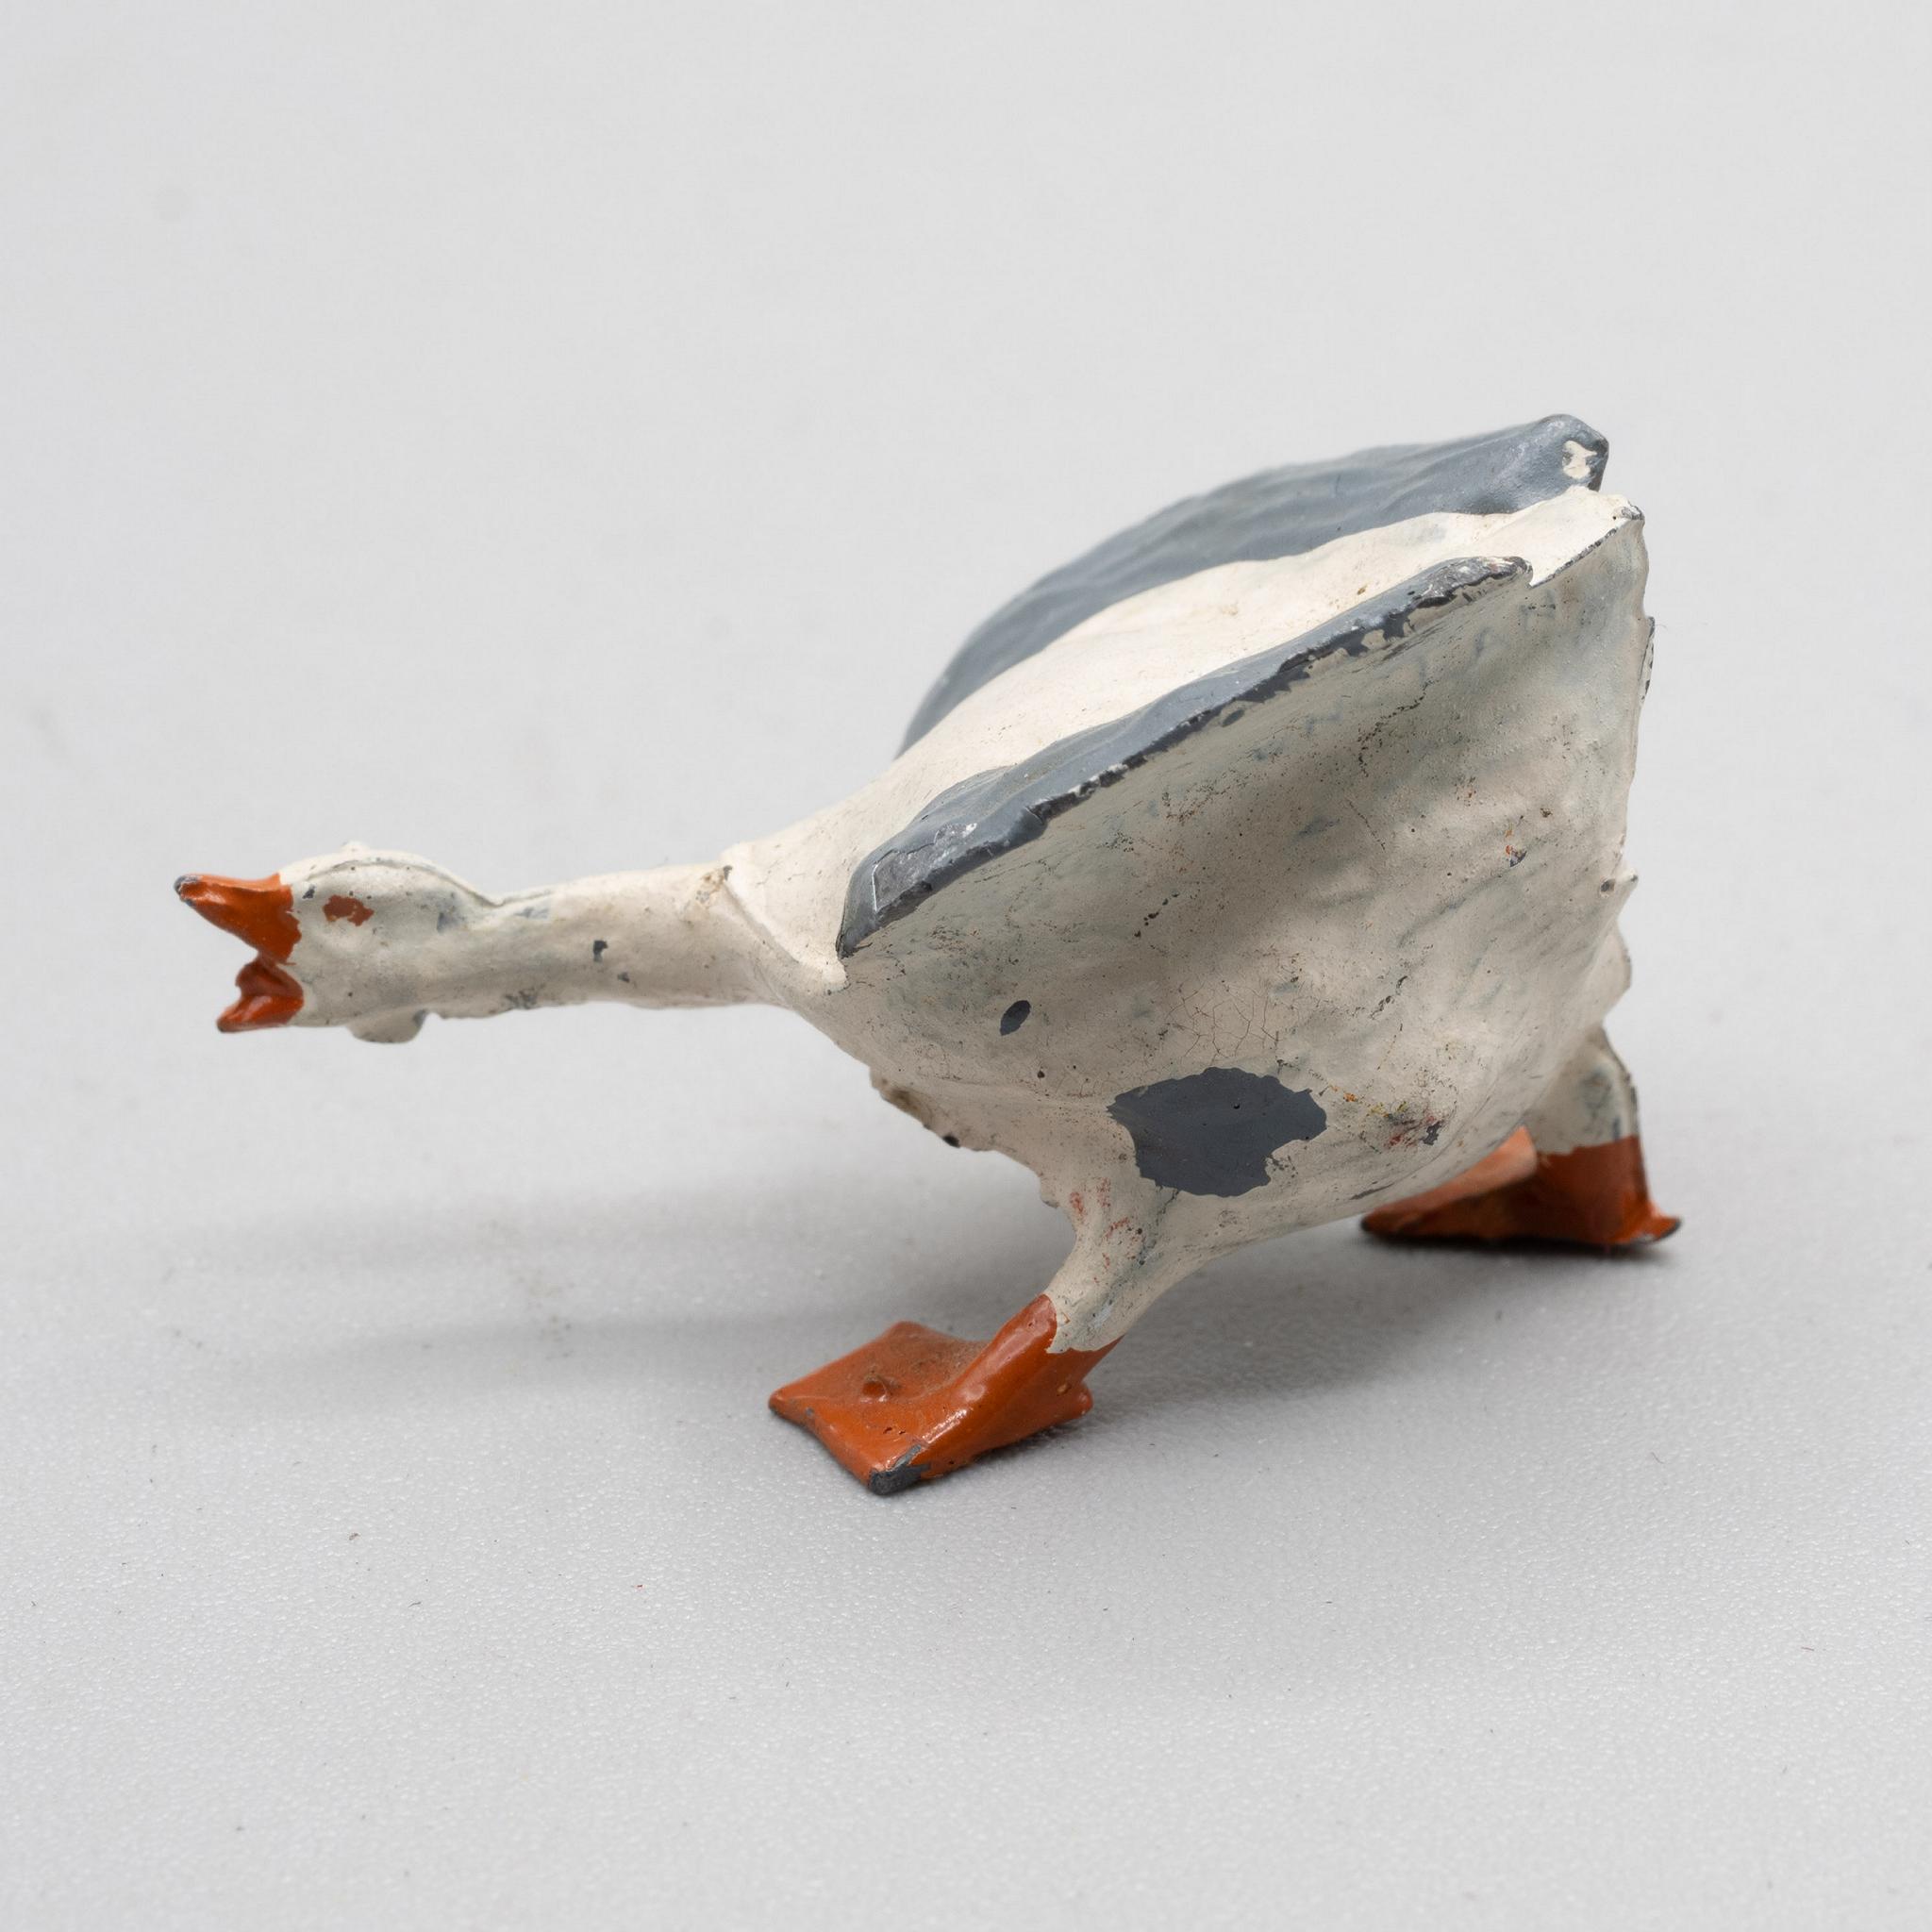 Lead+Angry+Gander+Farm+Animal+Toy+by+Crescent+England picture 3